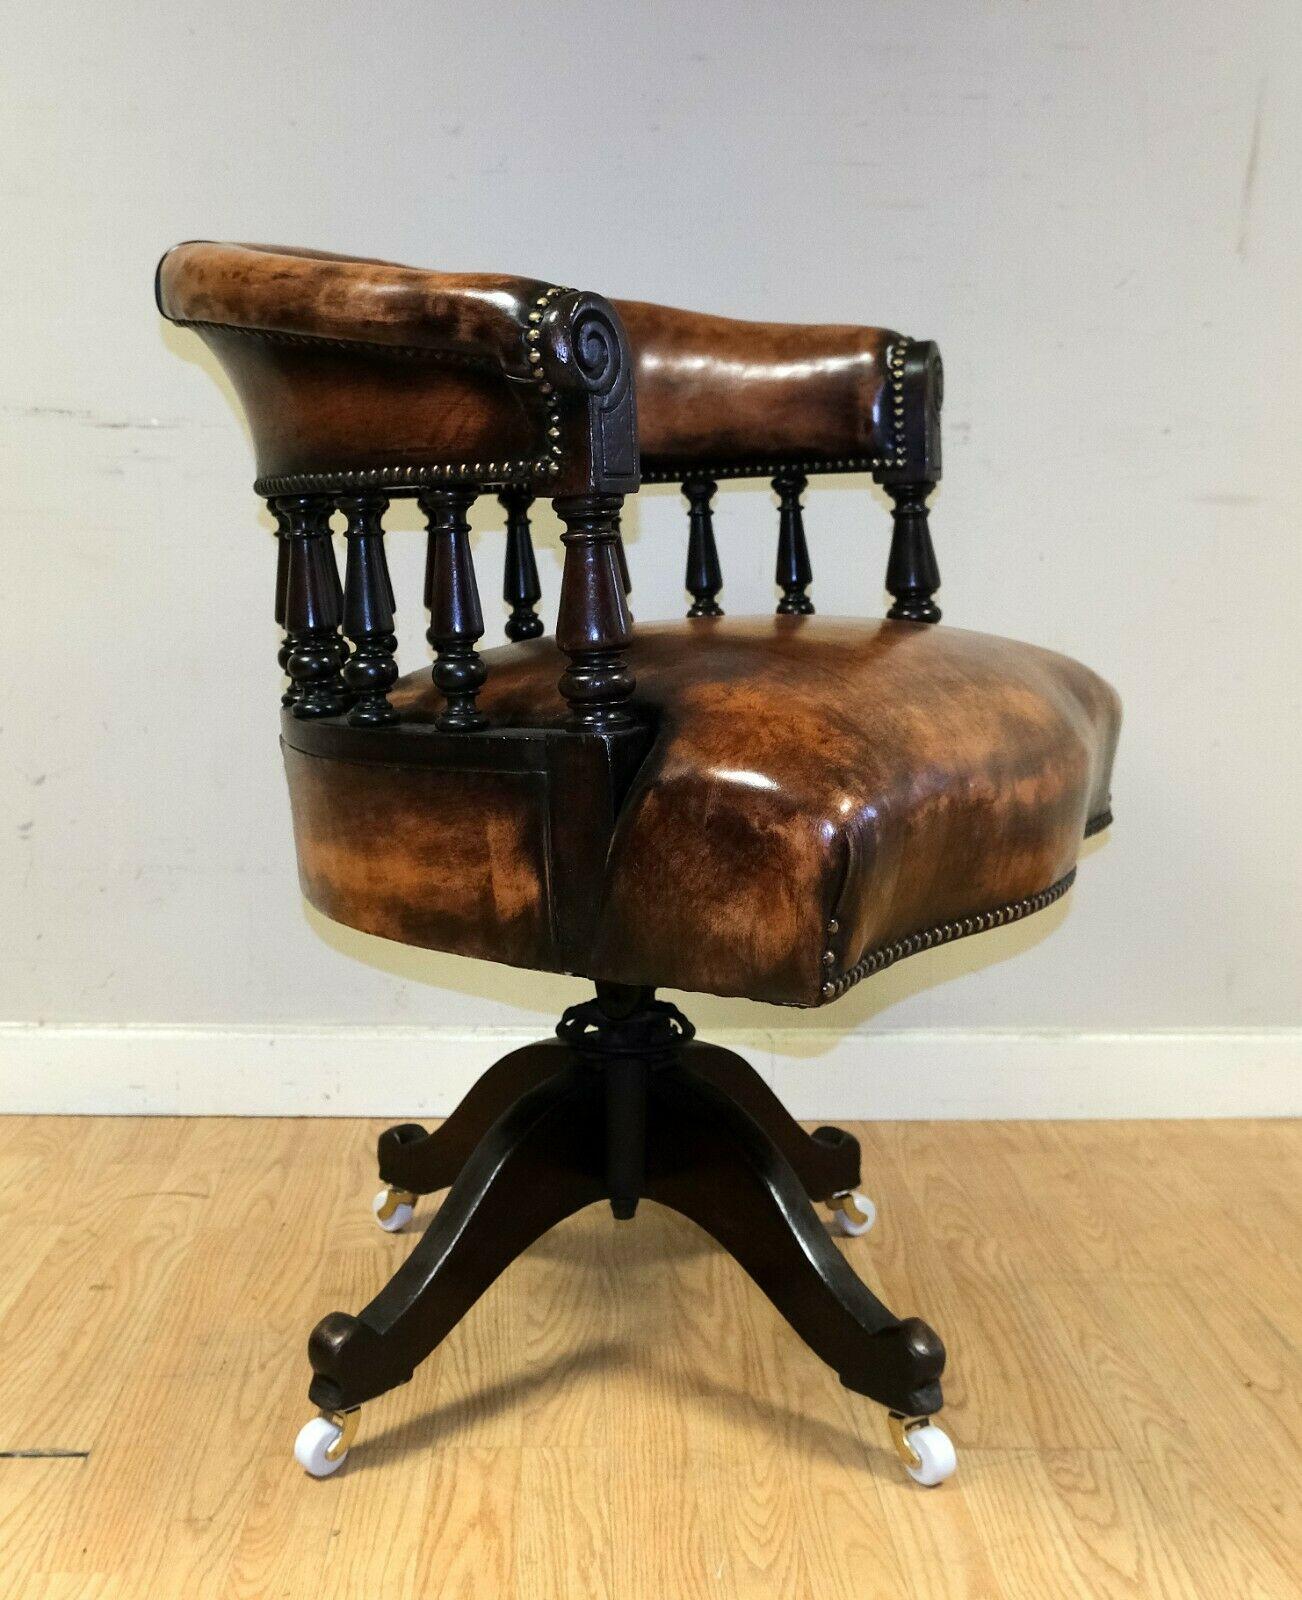 We are delighted to offer for sale this stunning William IV Mahogany & hand dyed leather captain swivel armchair. 

This sale is for a Victorian hand dyed brown leather captains swivel armchair which is base on a William IV design. The chair is